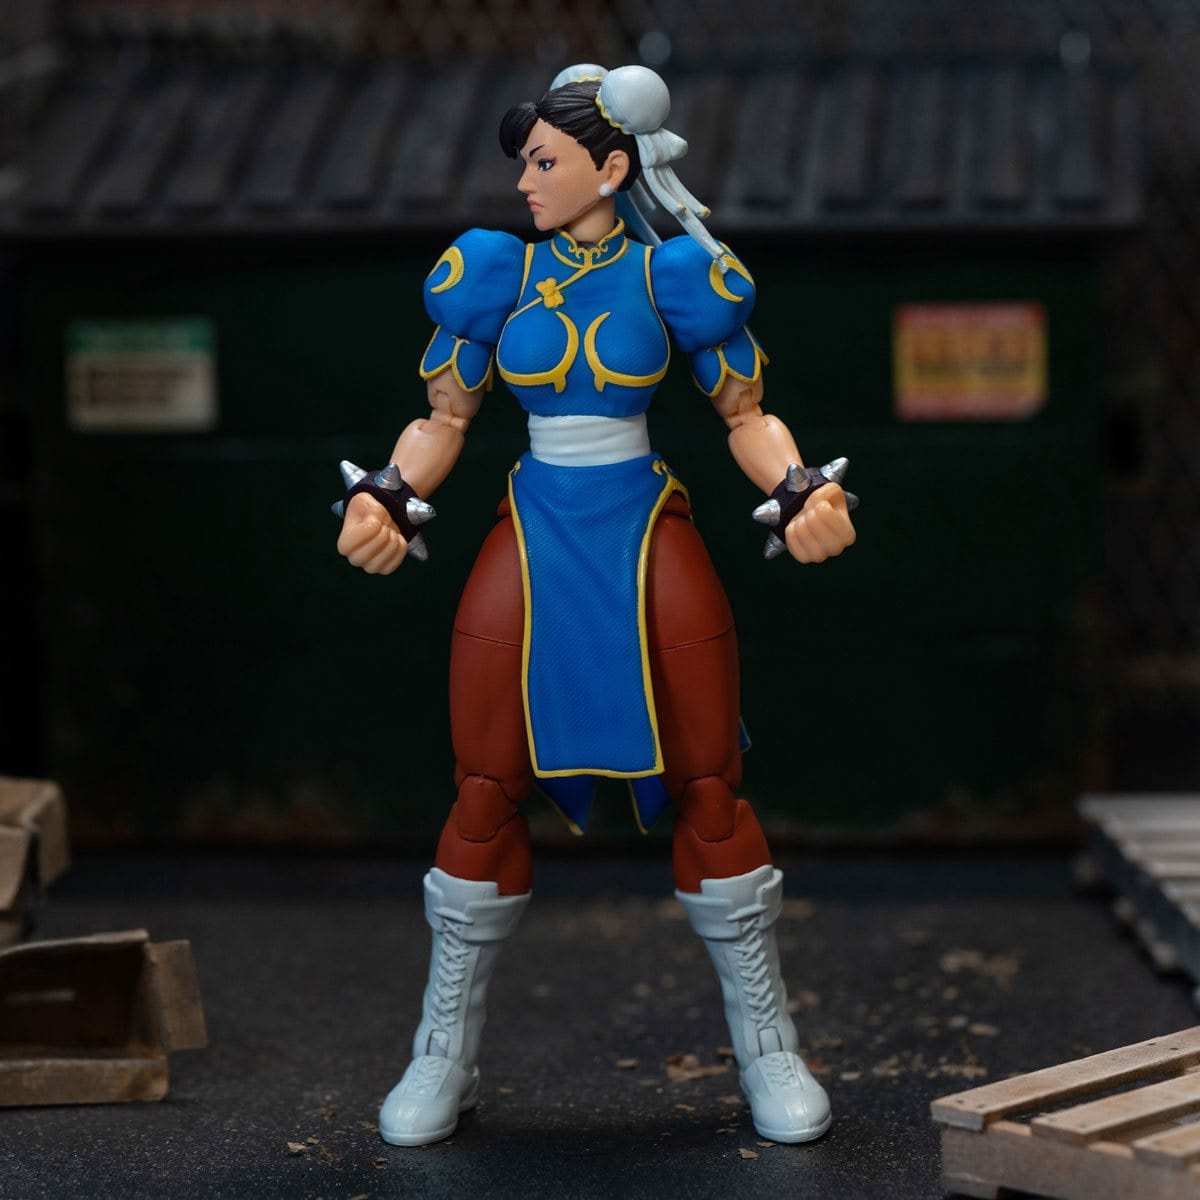 Ultra-Street-Fighter-II-Chun-Li6-Inch-Scale-Action-Figure-toys-pose-collectible-famous-pose